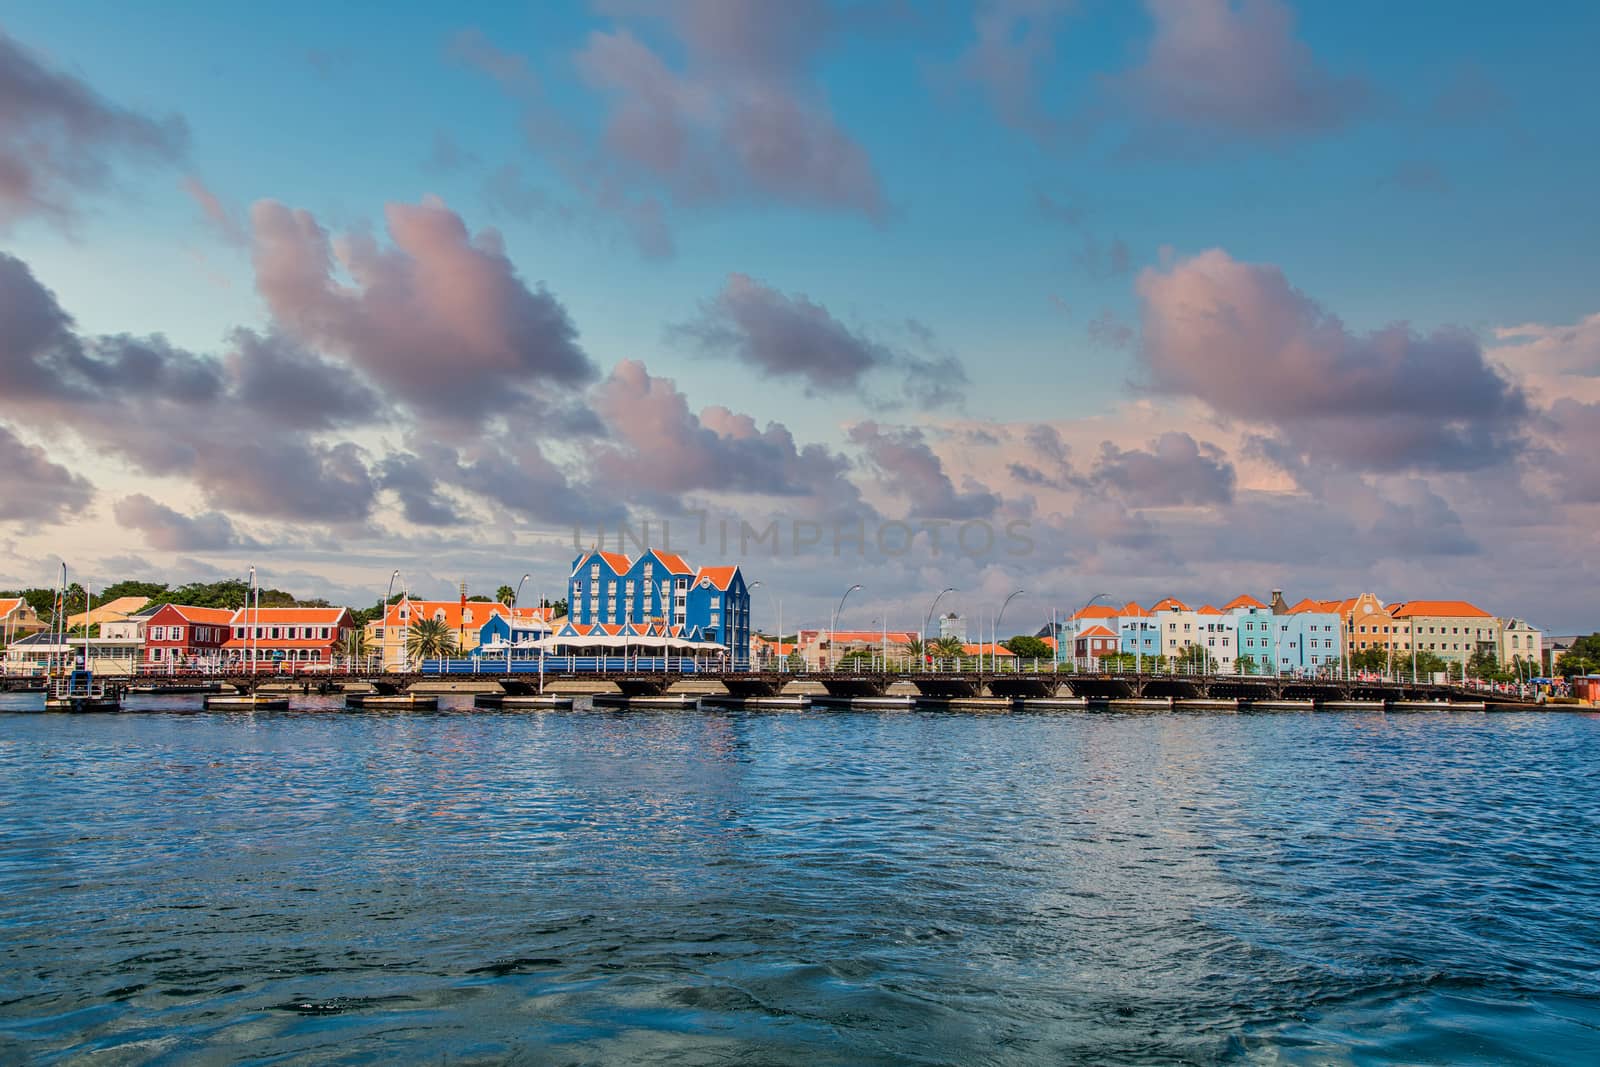 Moving Pontoon bridge at the mouth of the harbor in Willemstad, Curacao